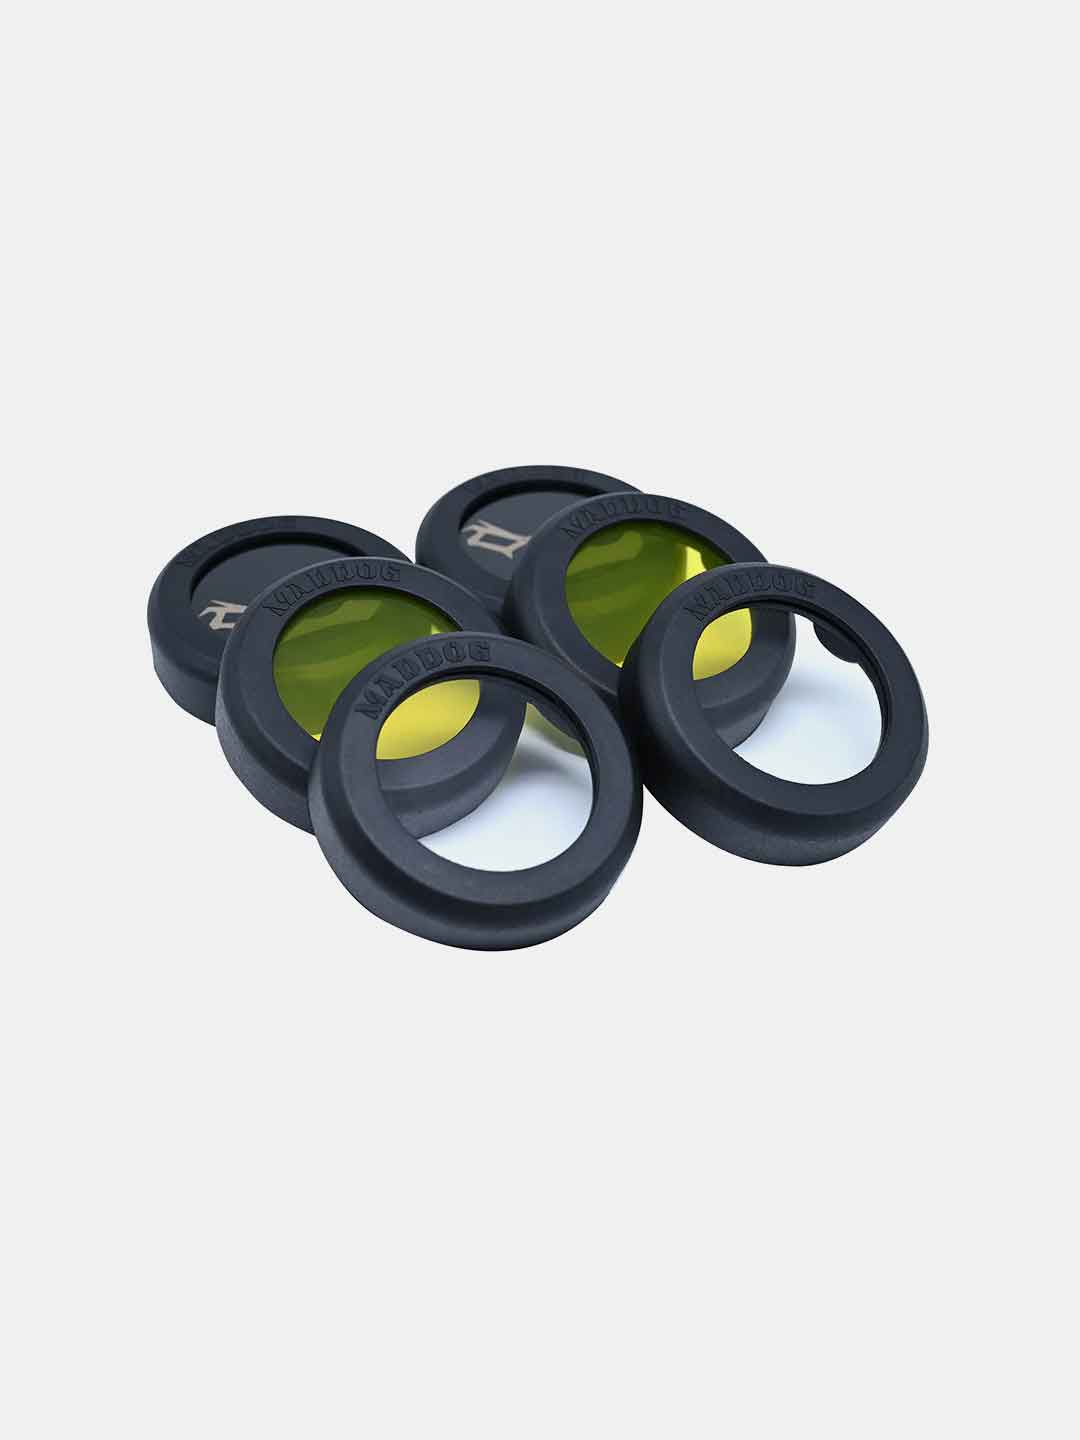 MadDog Scout/Scout-X Auxiliary light filters